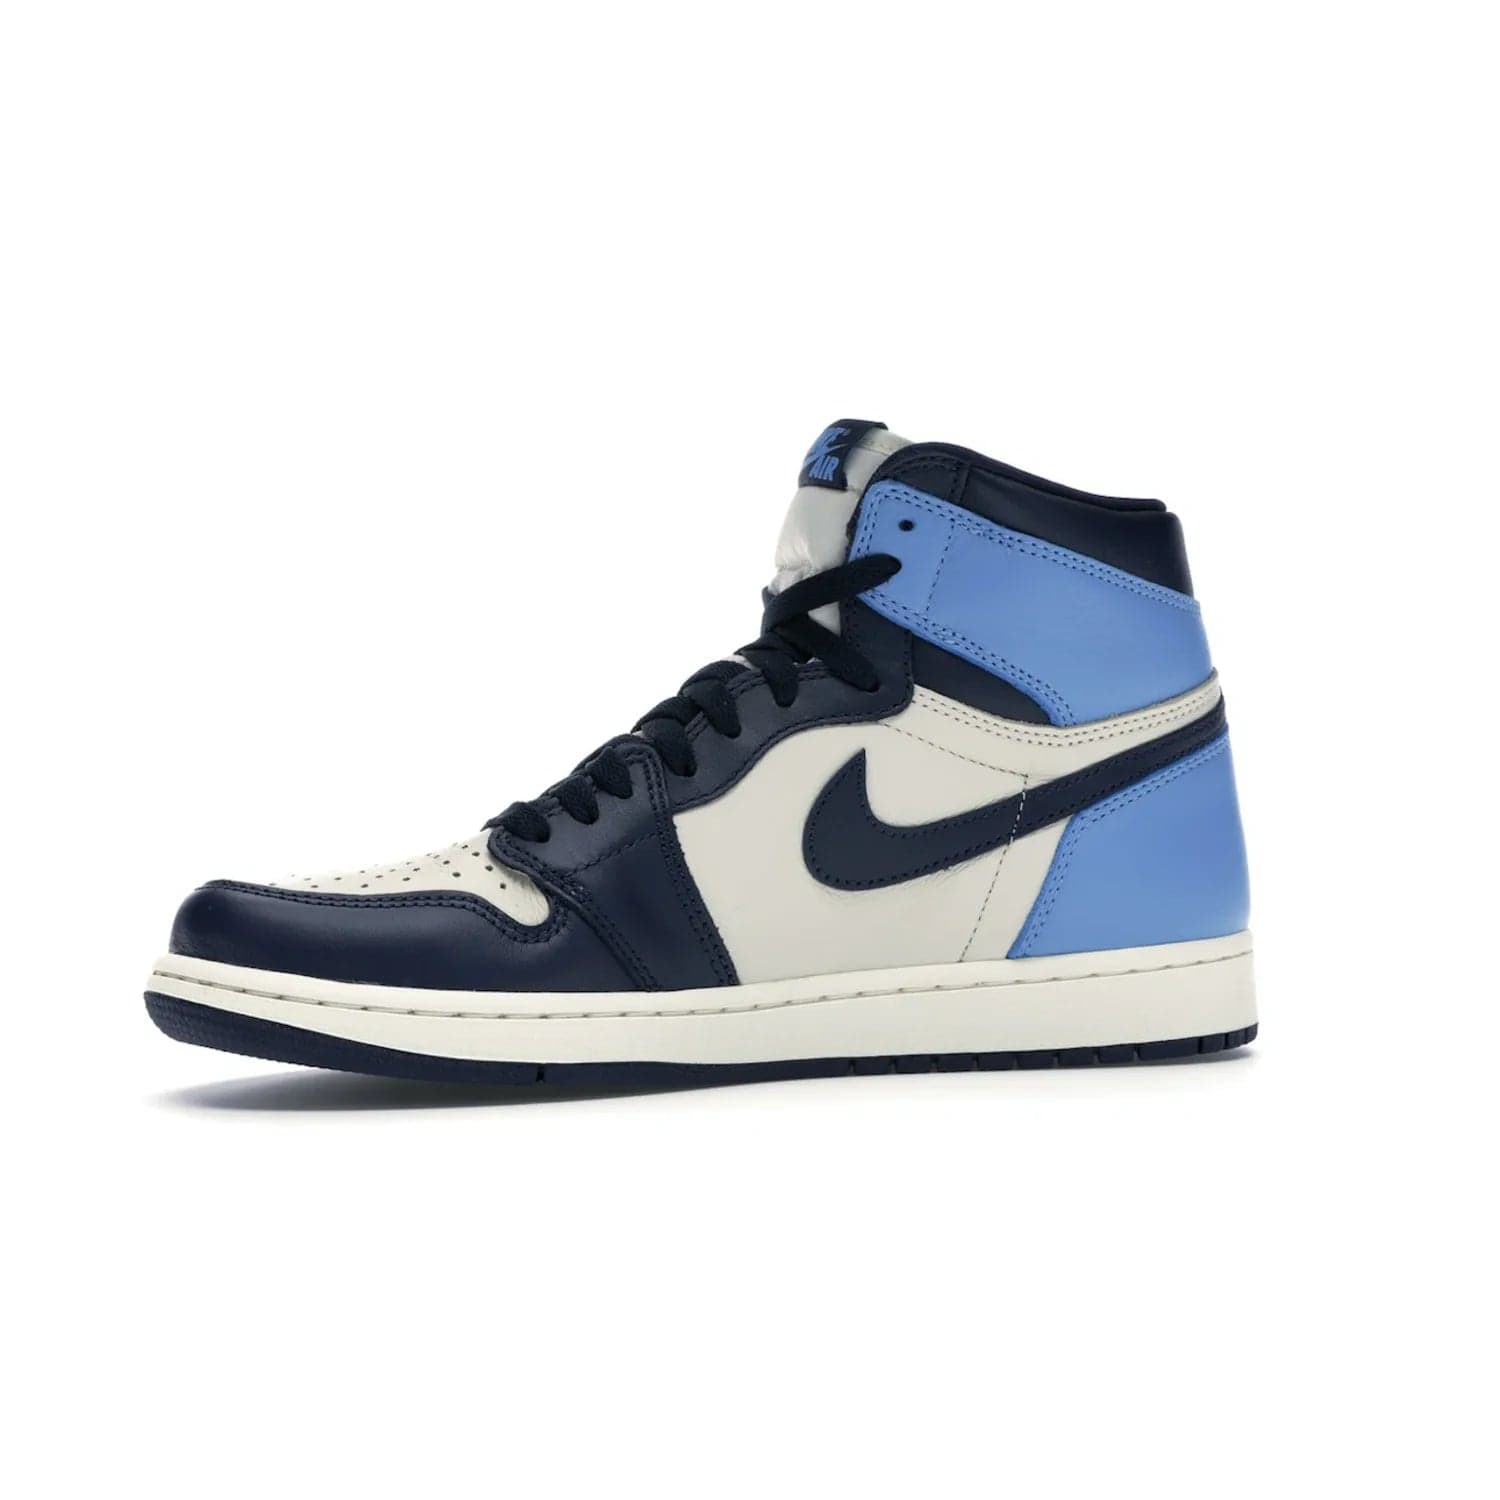 Jordan 1 Retro High Obsidian UNC - Image 17 - Only at www.BallersClubKickz.com - Bring a timeless classic to your wardrobe with the Air Jordan 1 Retro High "Obsidian/University Blue”. A full leather upper combines Obsidian and University Blue detailing for a retro Jordan style. Stitched Jumpman logo pays tribute to UNC. Experience classic style with a timeless sneaker.